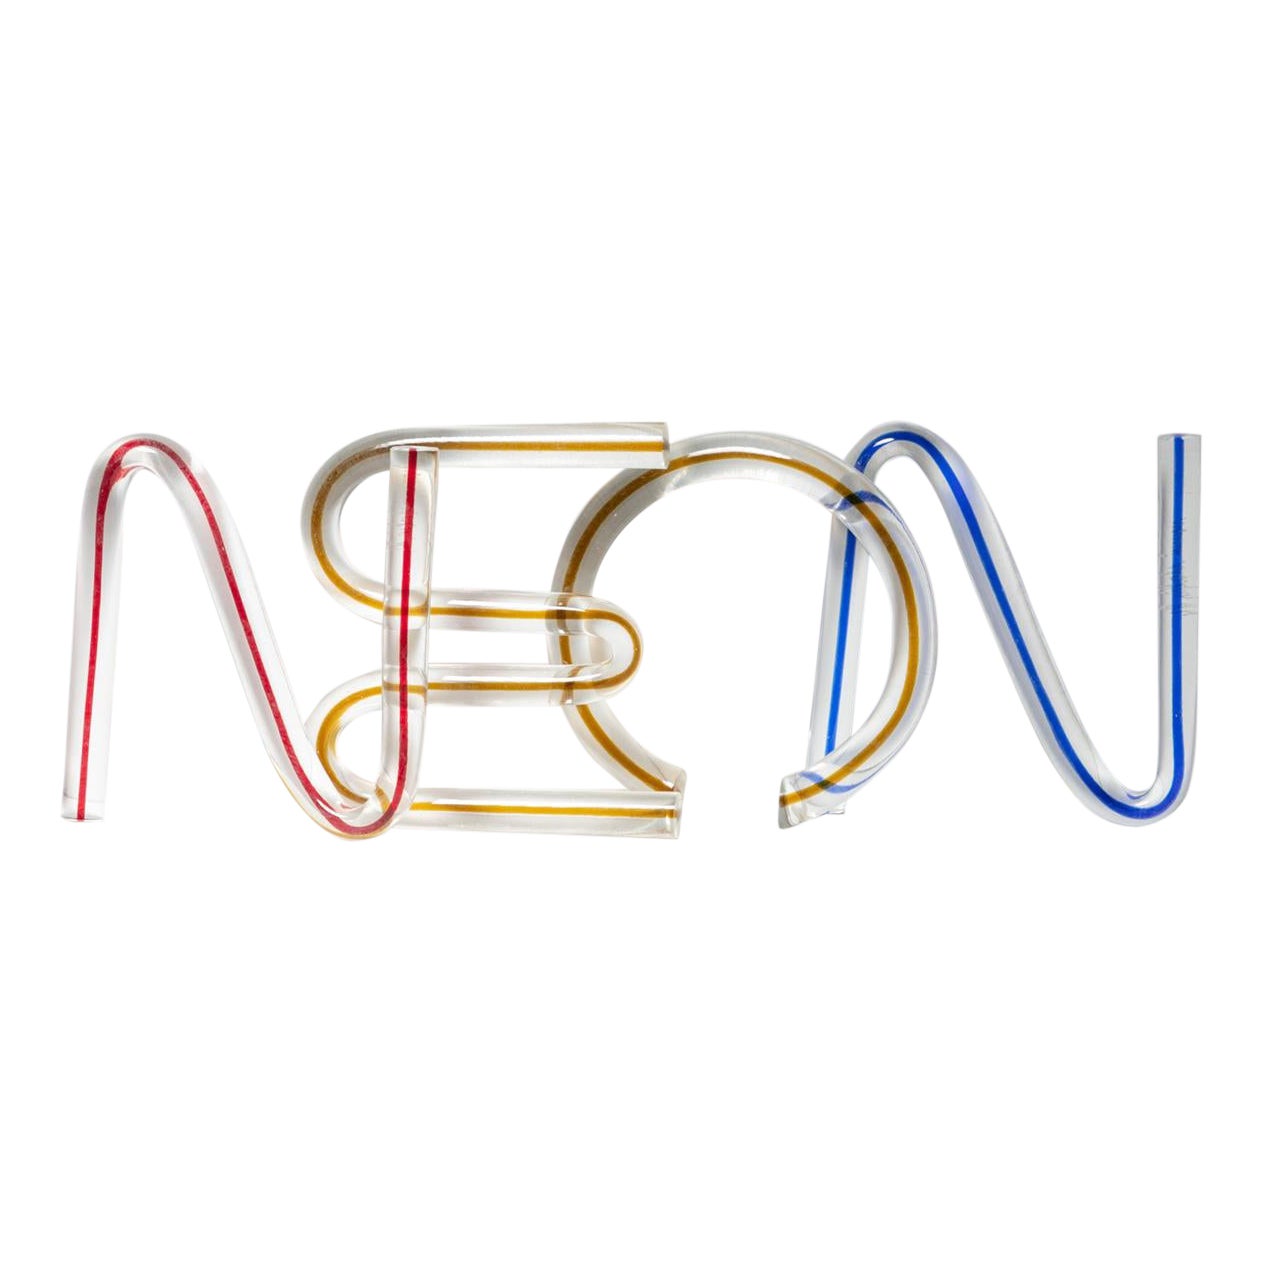 "N" "E" "O" "N" Crystal Letters by Massimo Vignelli for Venini, Italy, 1980s